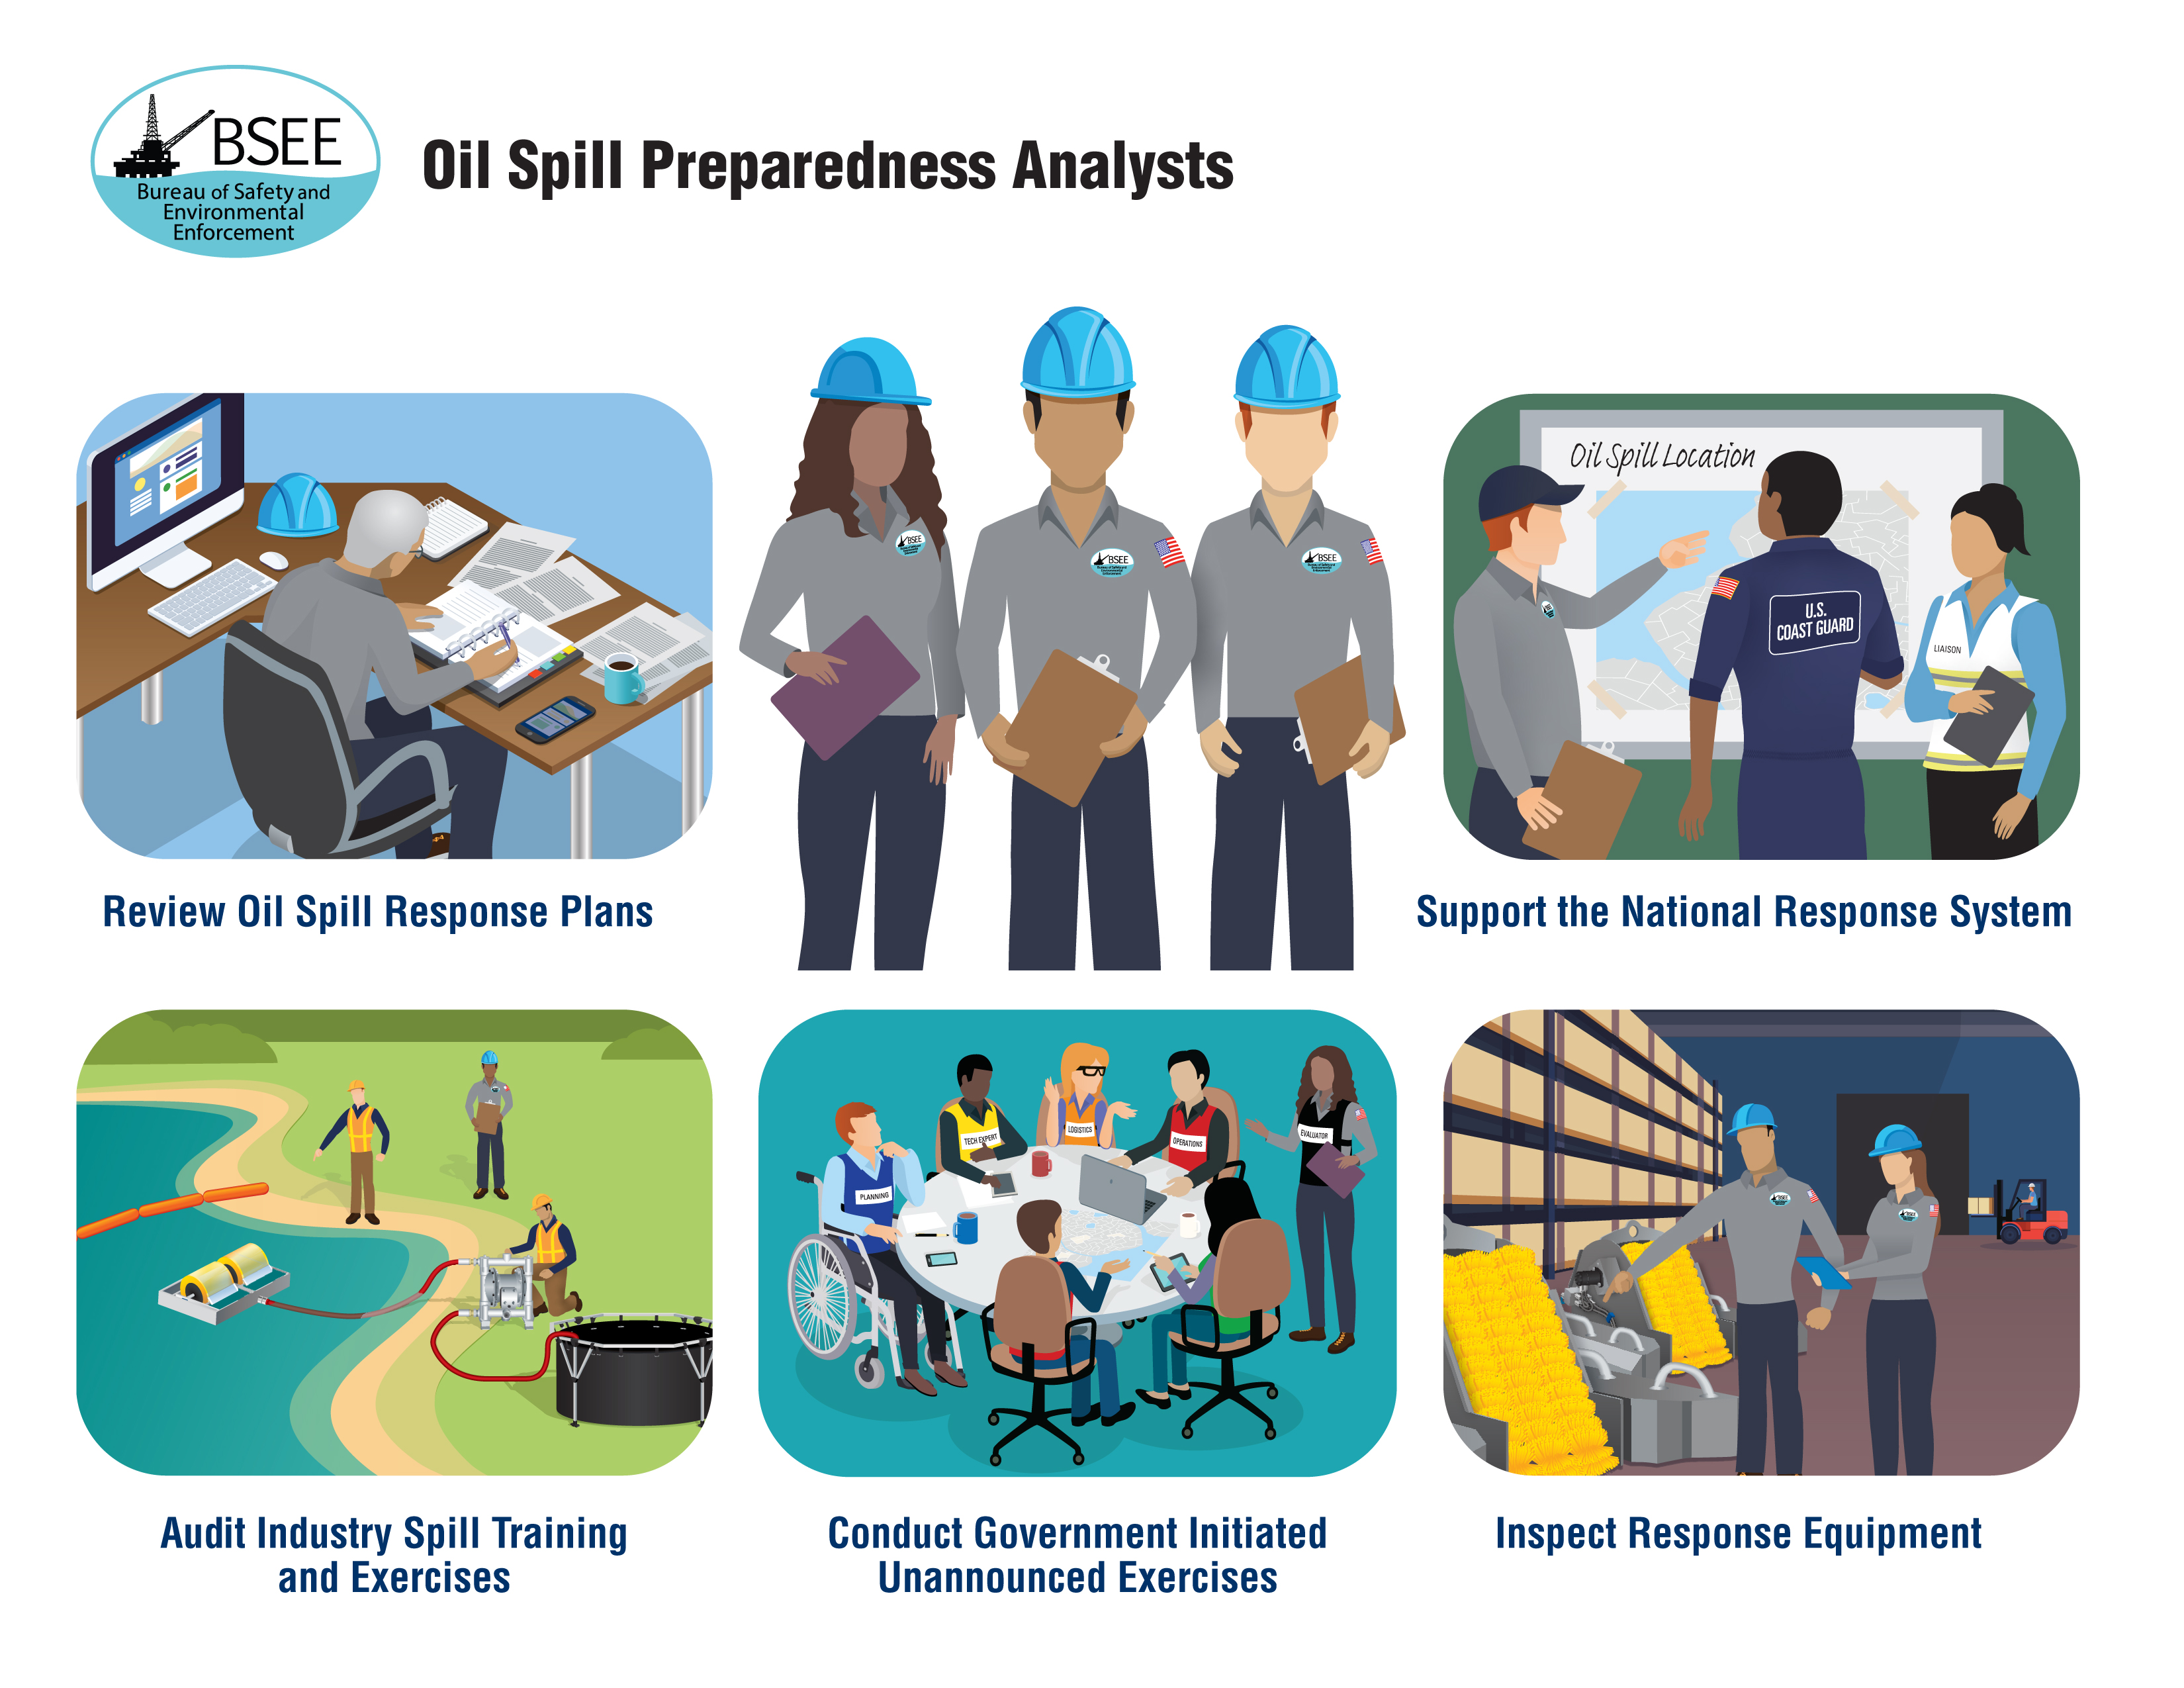 BSEE Oil Spill Preparedness Analysts Infographic PDF